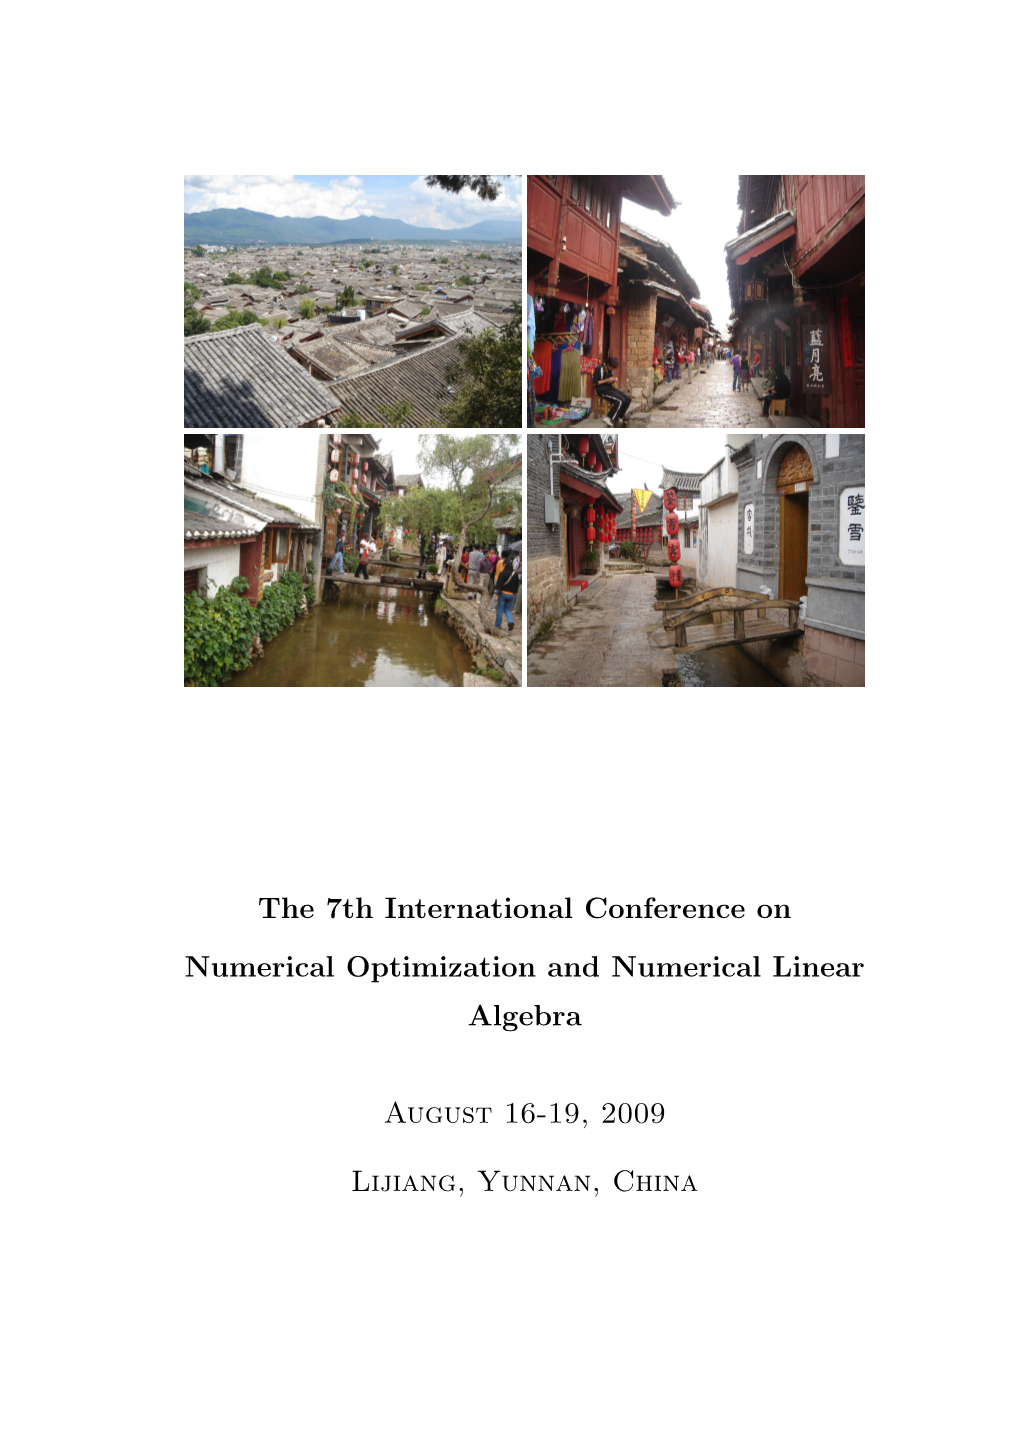 The 7Th International Conference on Numerical Optimization and Numerical Linear Algebra